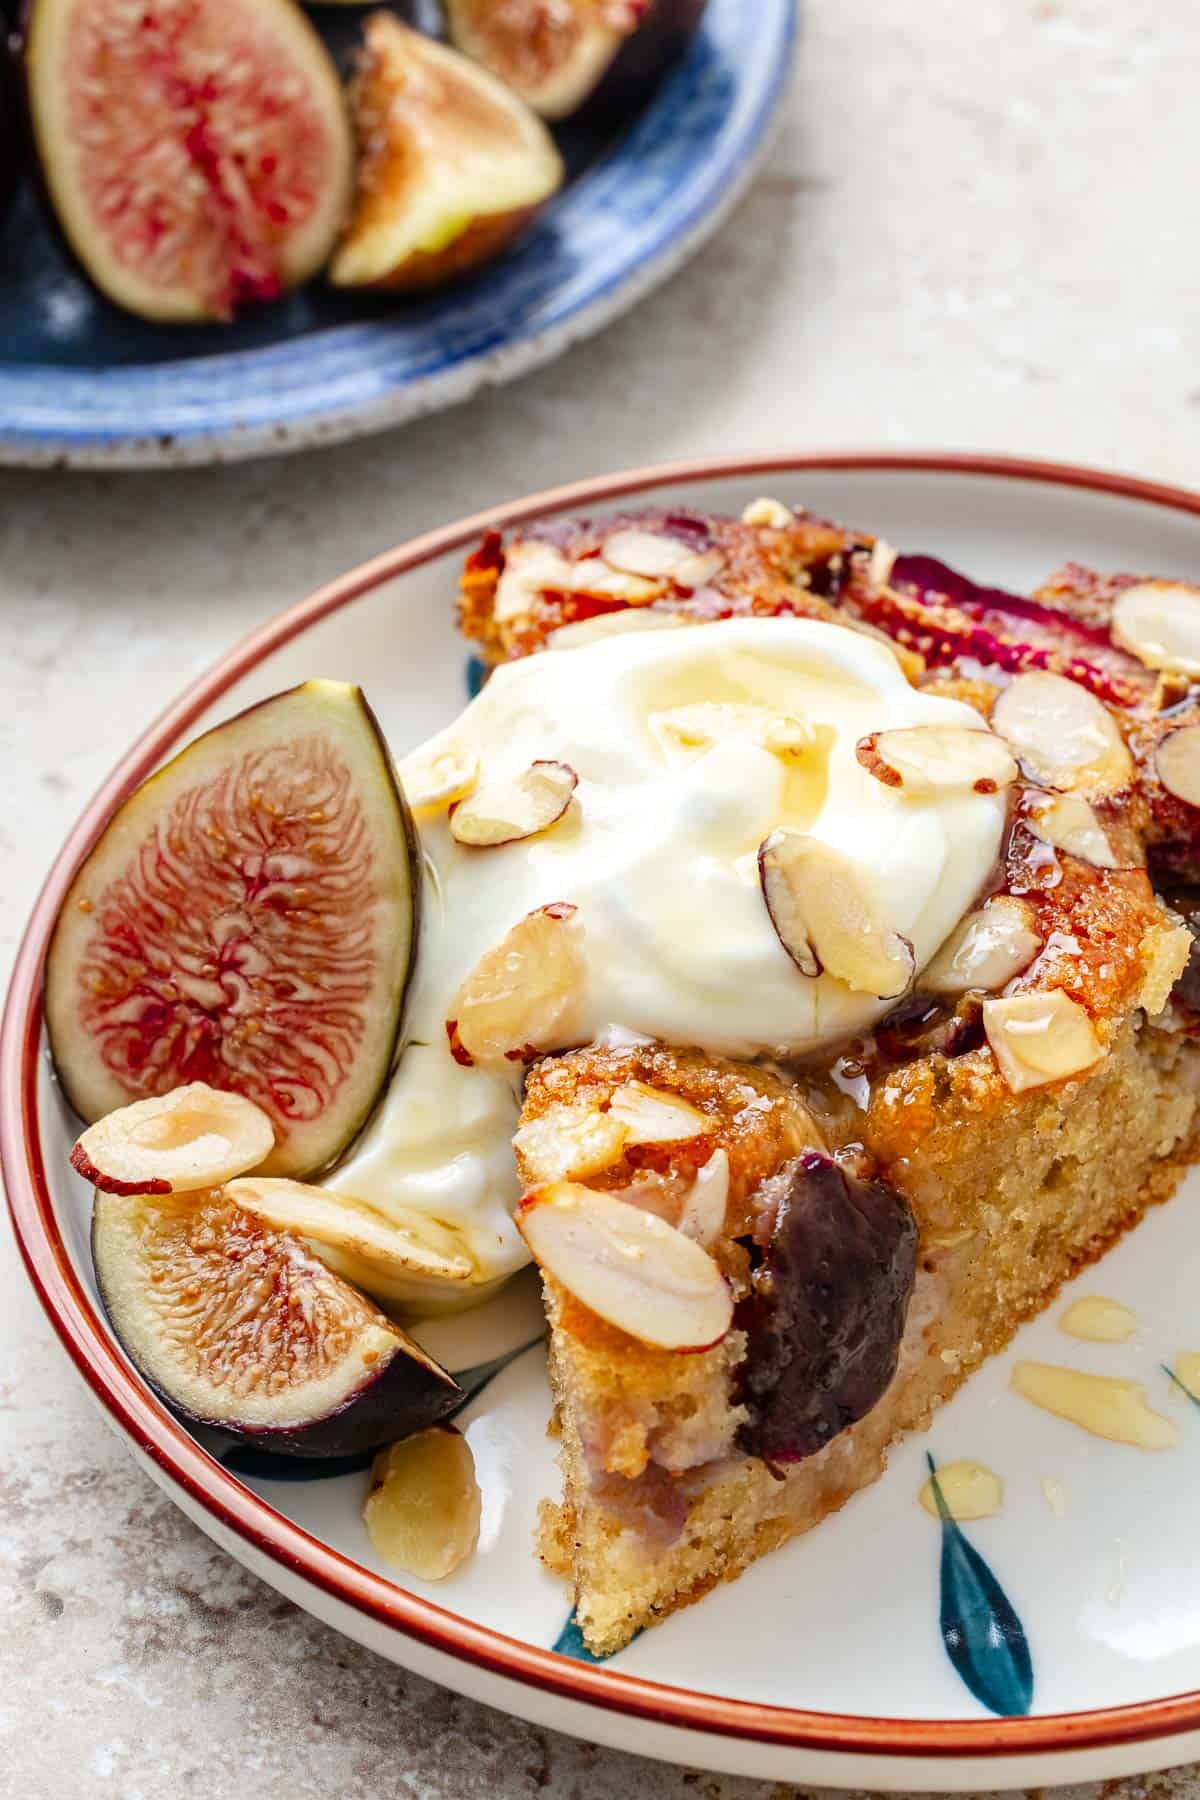 Slice of fig cake with Greek yogurt and a drizzle of honey on top.